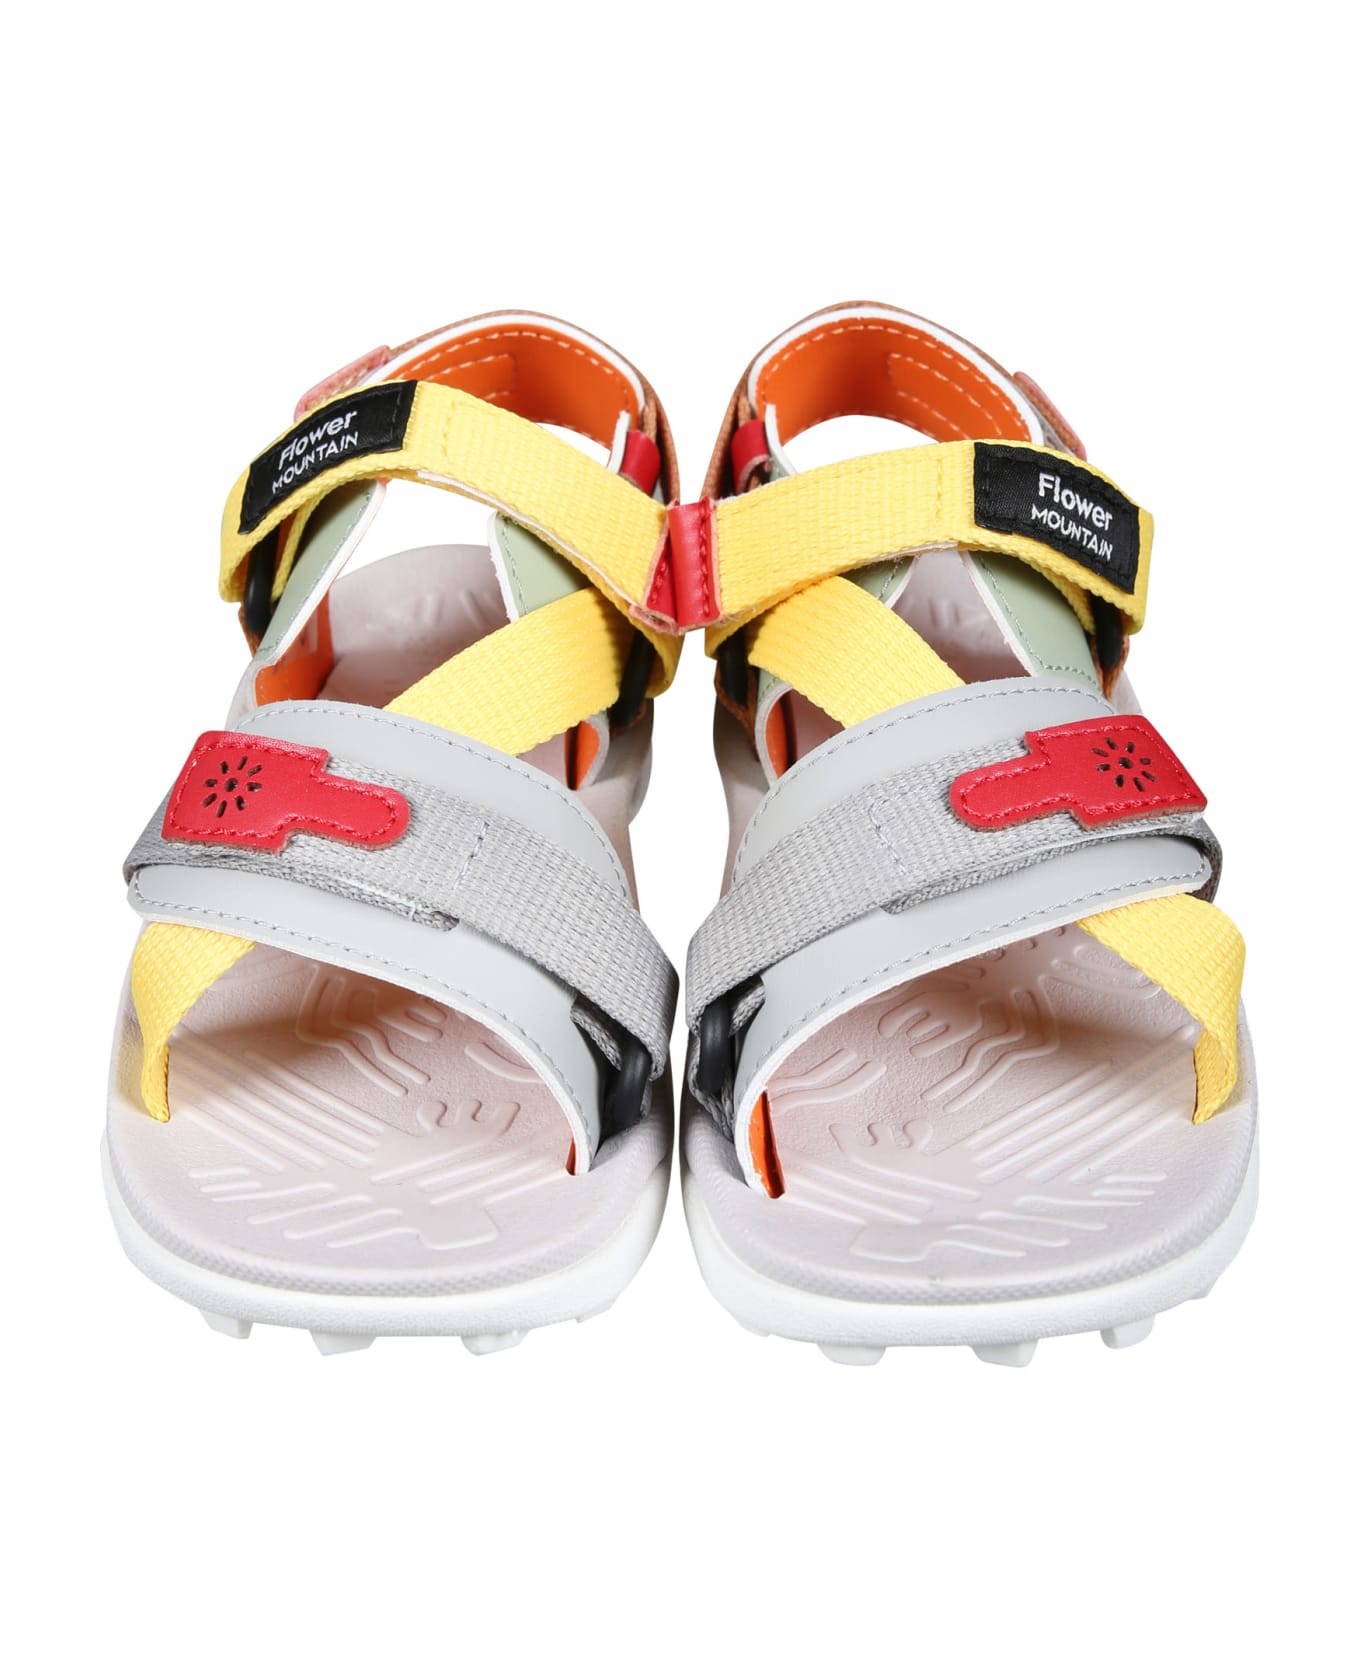 Flower Mountain Multicolor Nazca Sandals For Boy With Logo - Multicolor